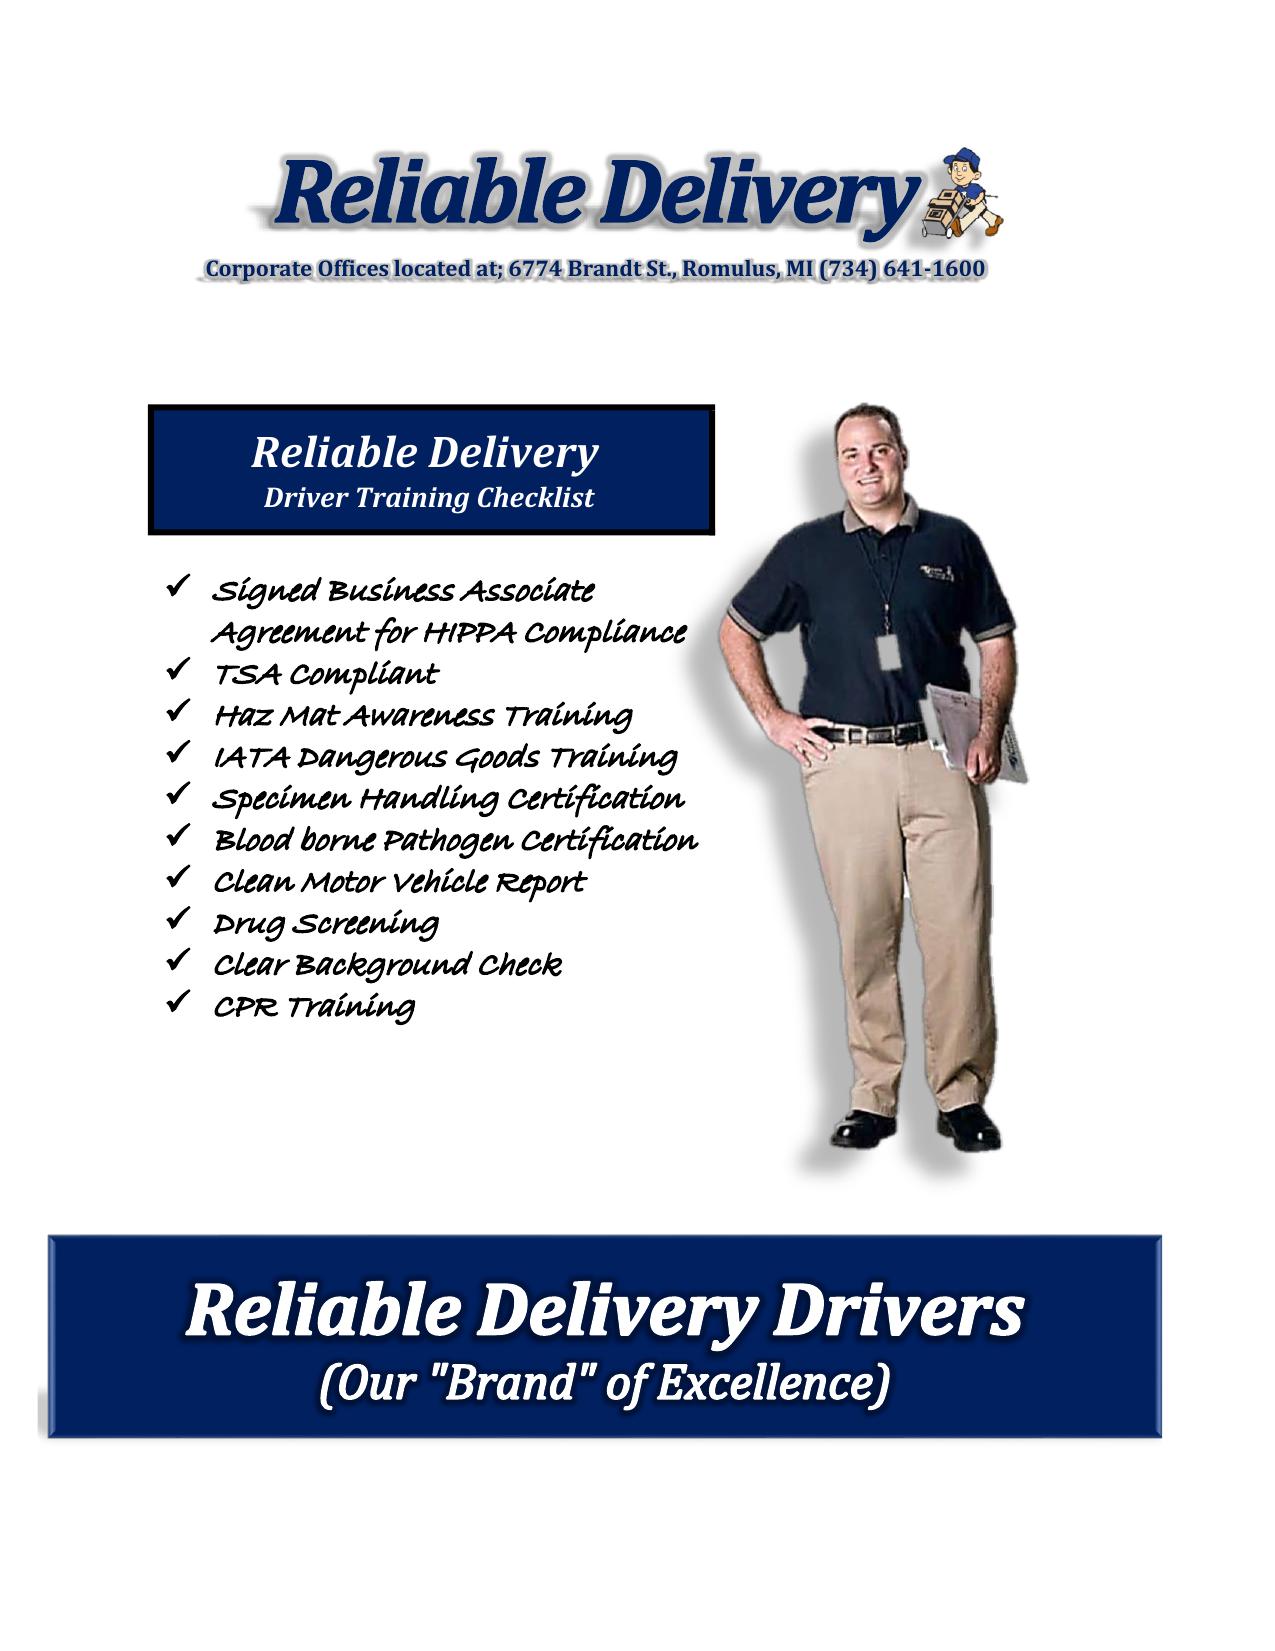 Reliable Delivery Driver Qualifications